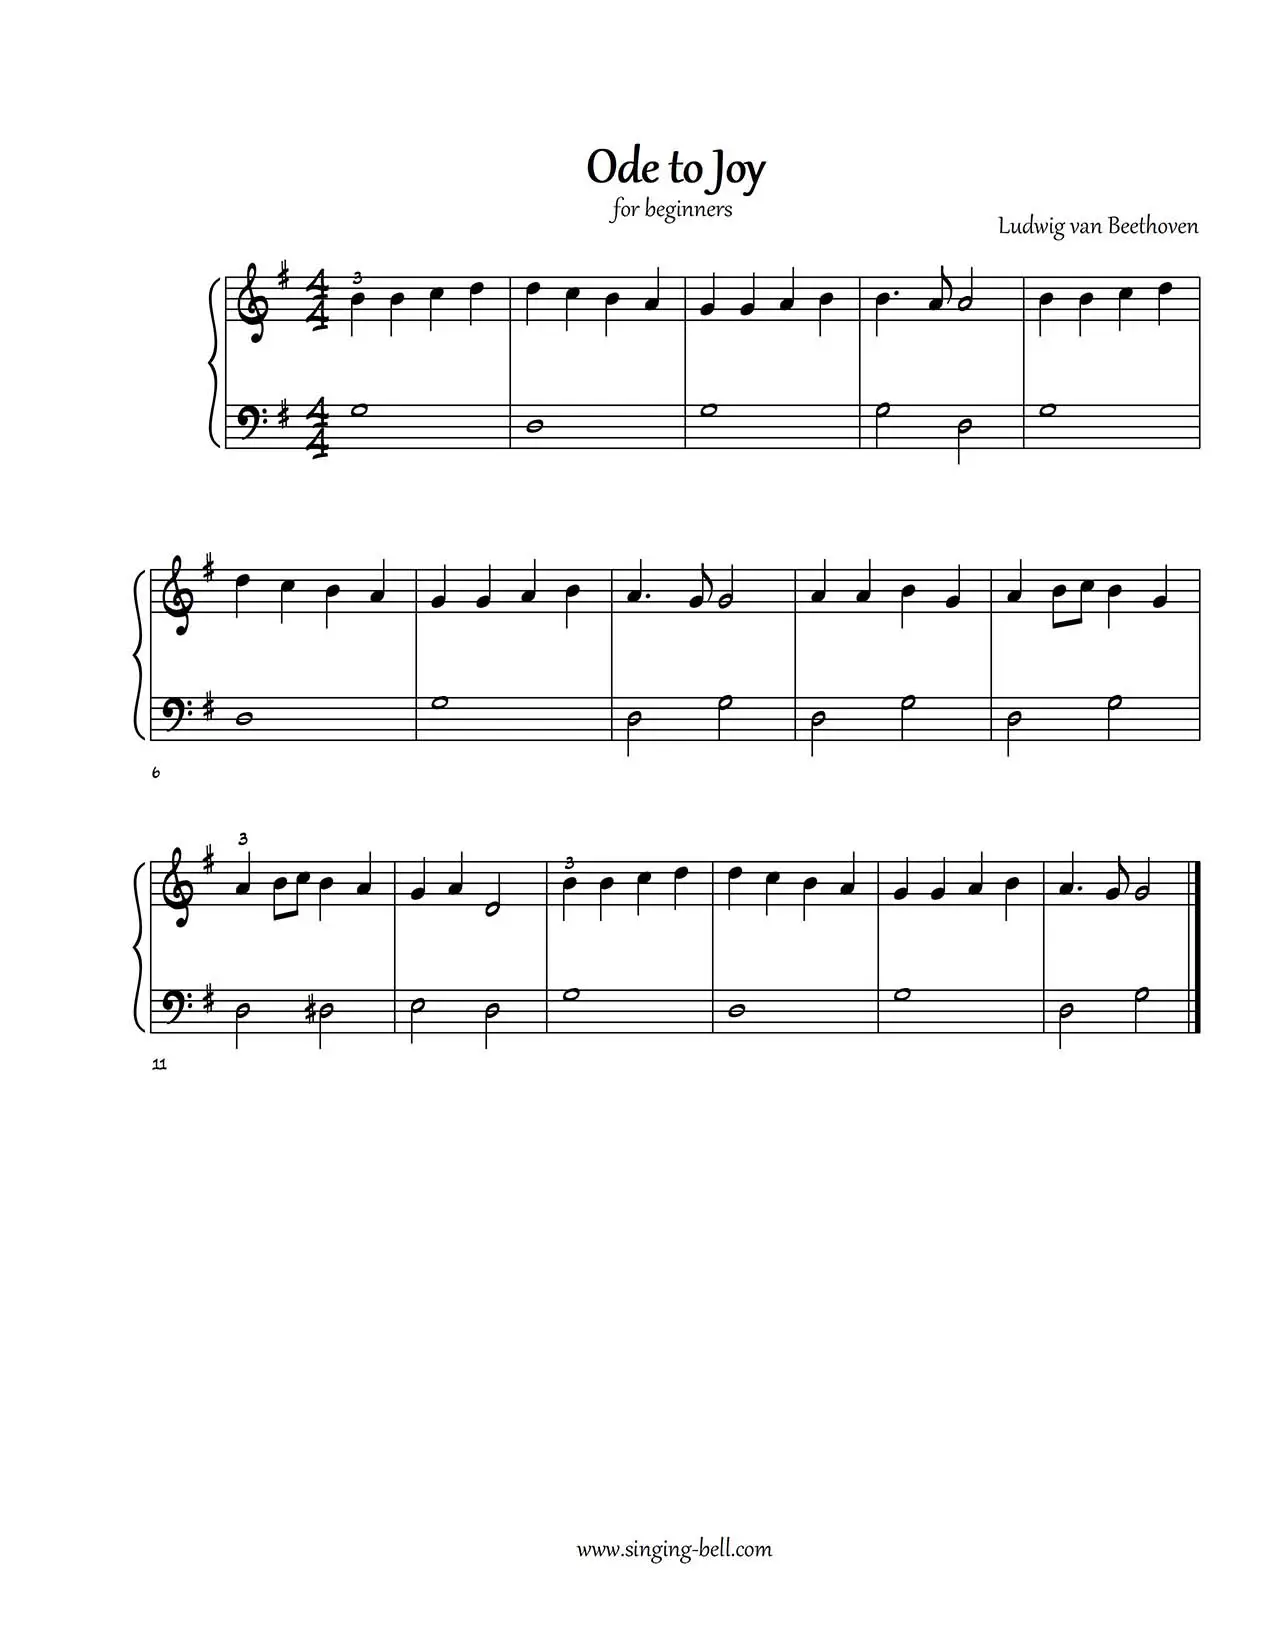 Ode to Joy easy piano sheet music notes beginners